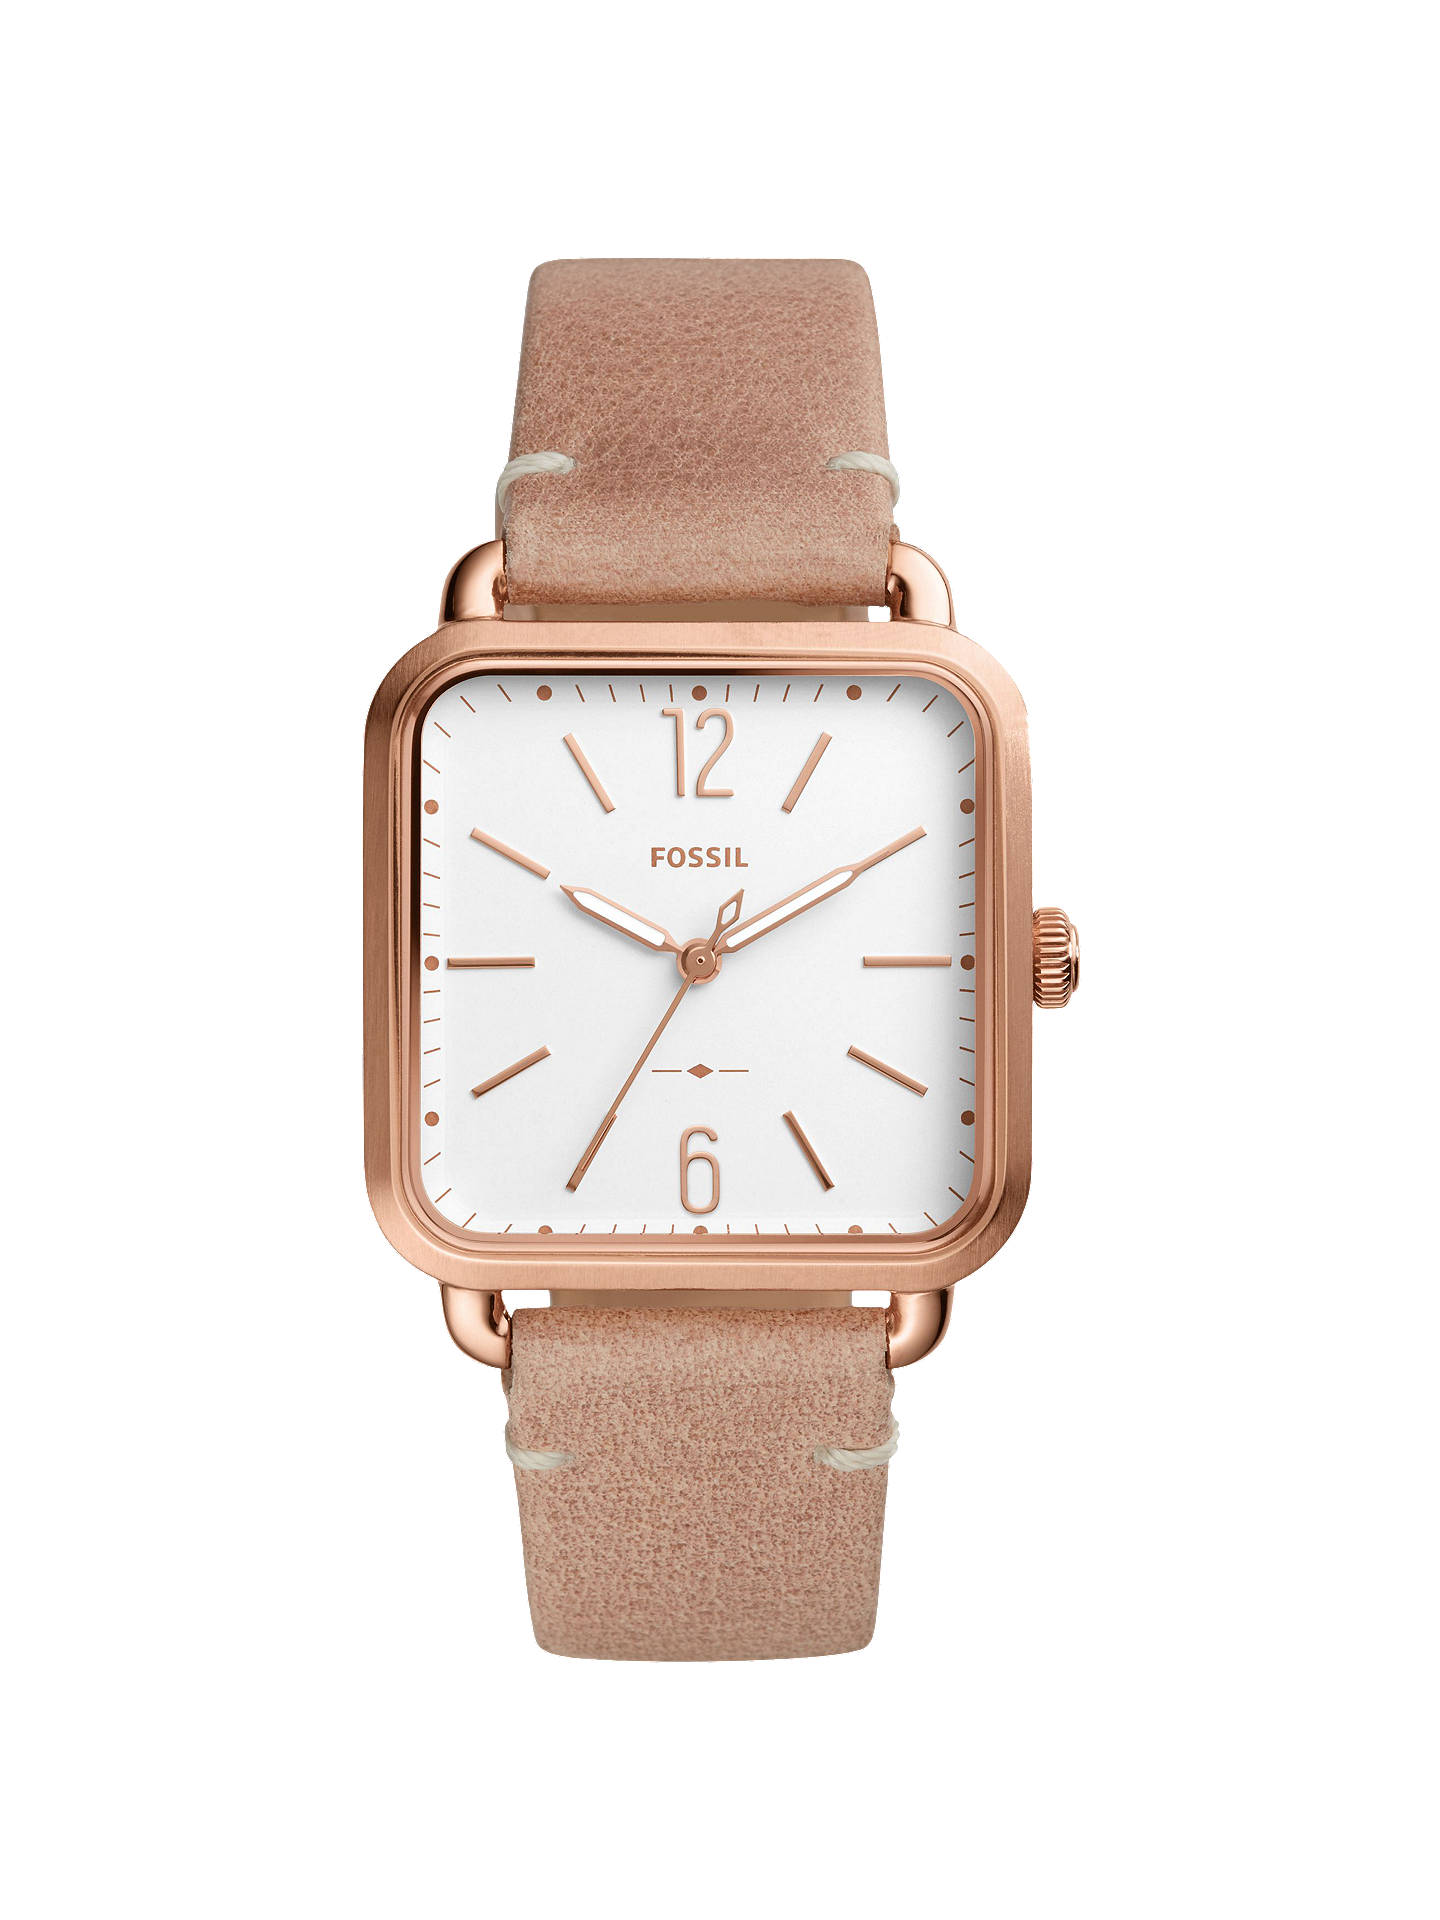 Fossil ES4254 Womens Rose Gold Leather Strap Square Watch 